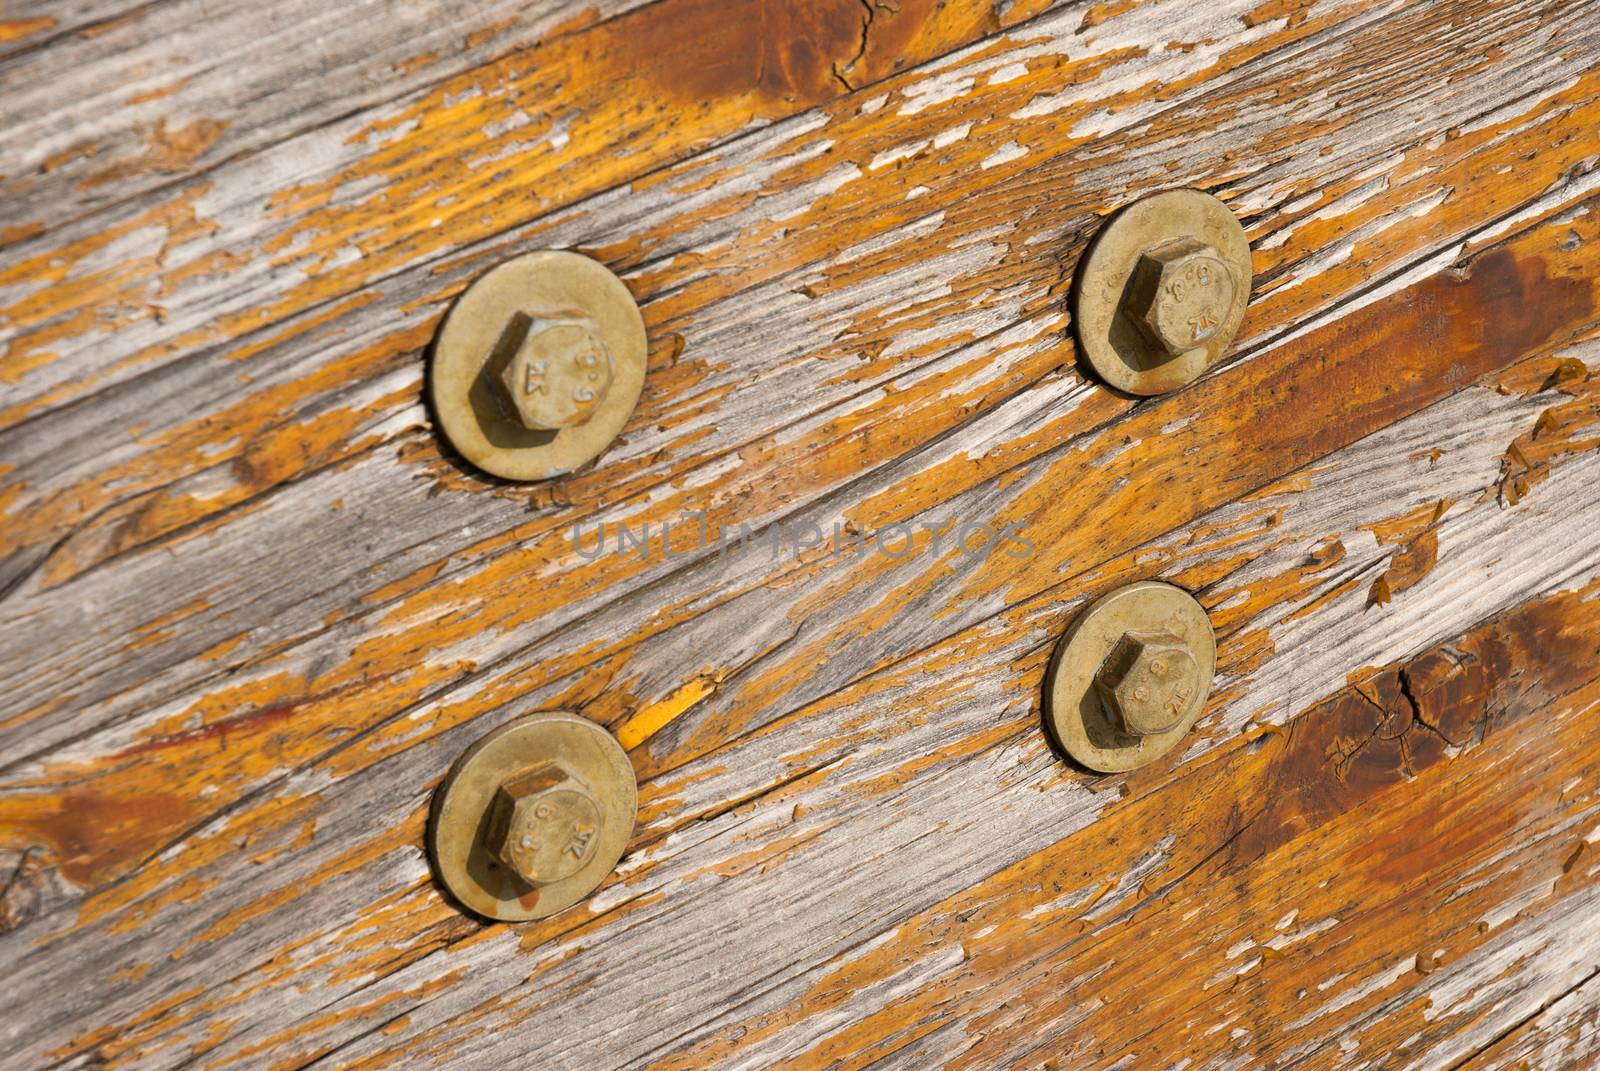 Wooden texture with bolts by AnaMarques